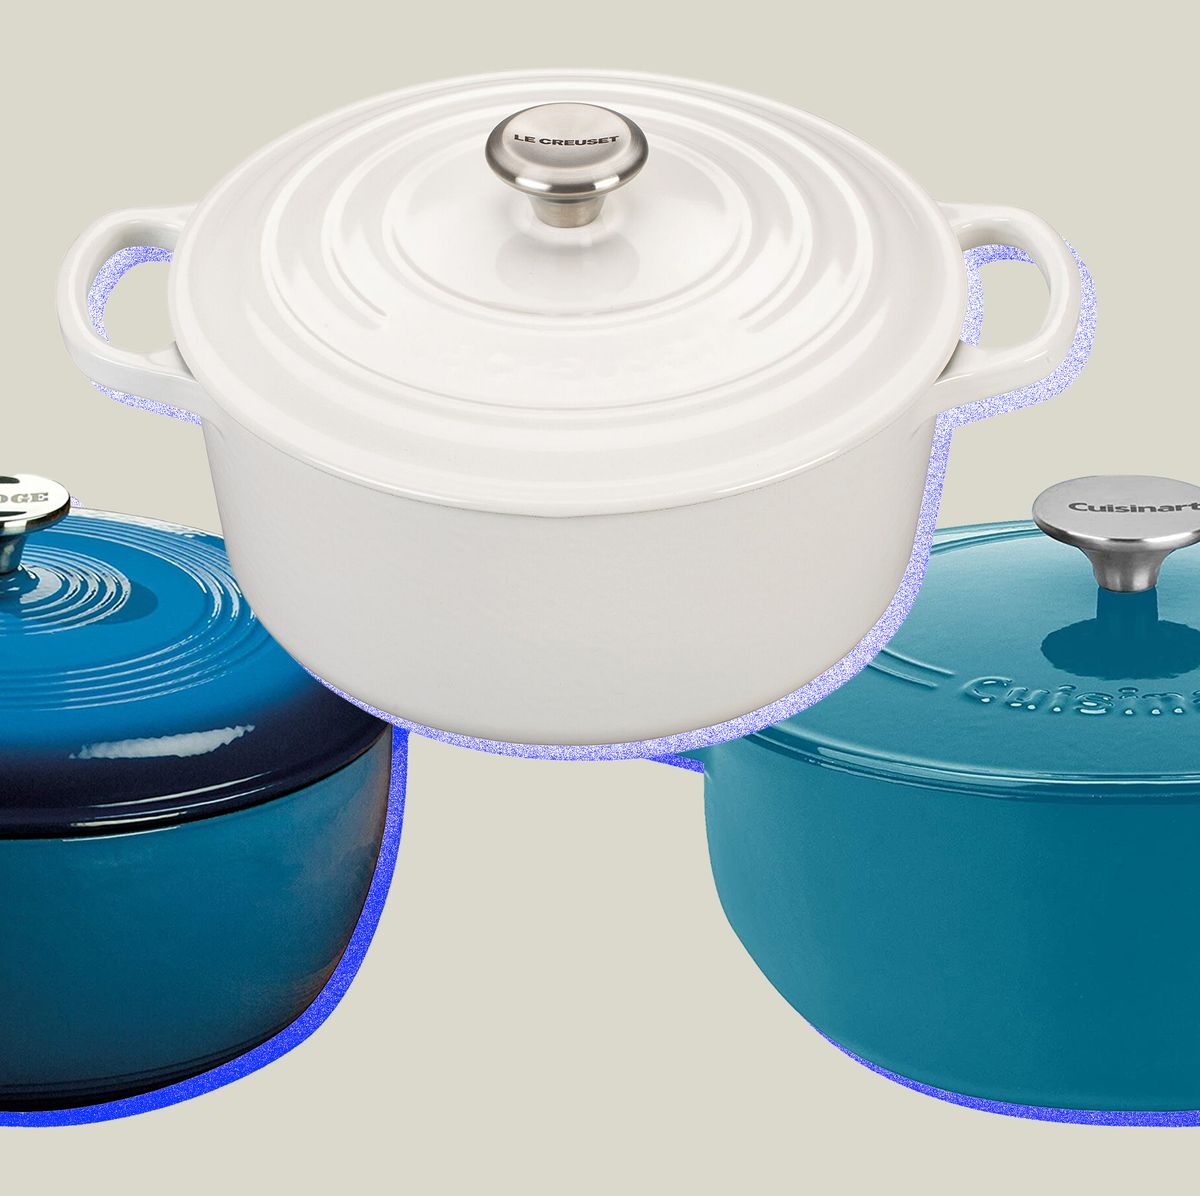 Move Over Le Crueset! Lodge is My Highly Affordable Choice for a Handsome,  High-Quality Enameled Cast Iron Dutch Oven